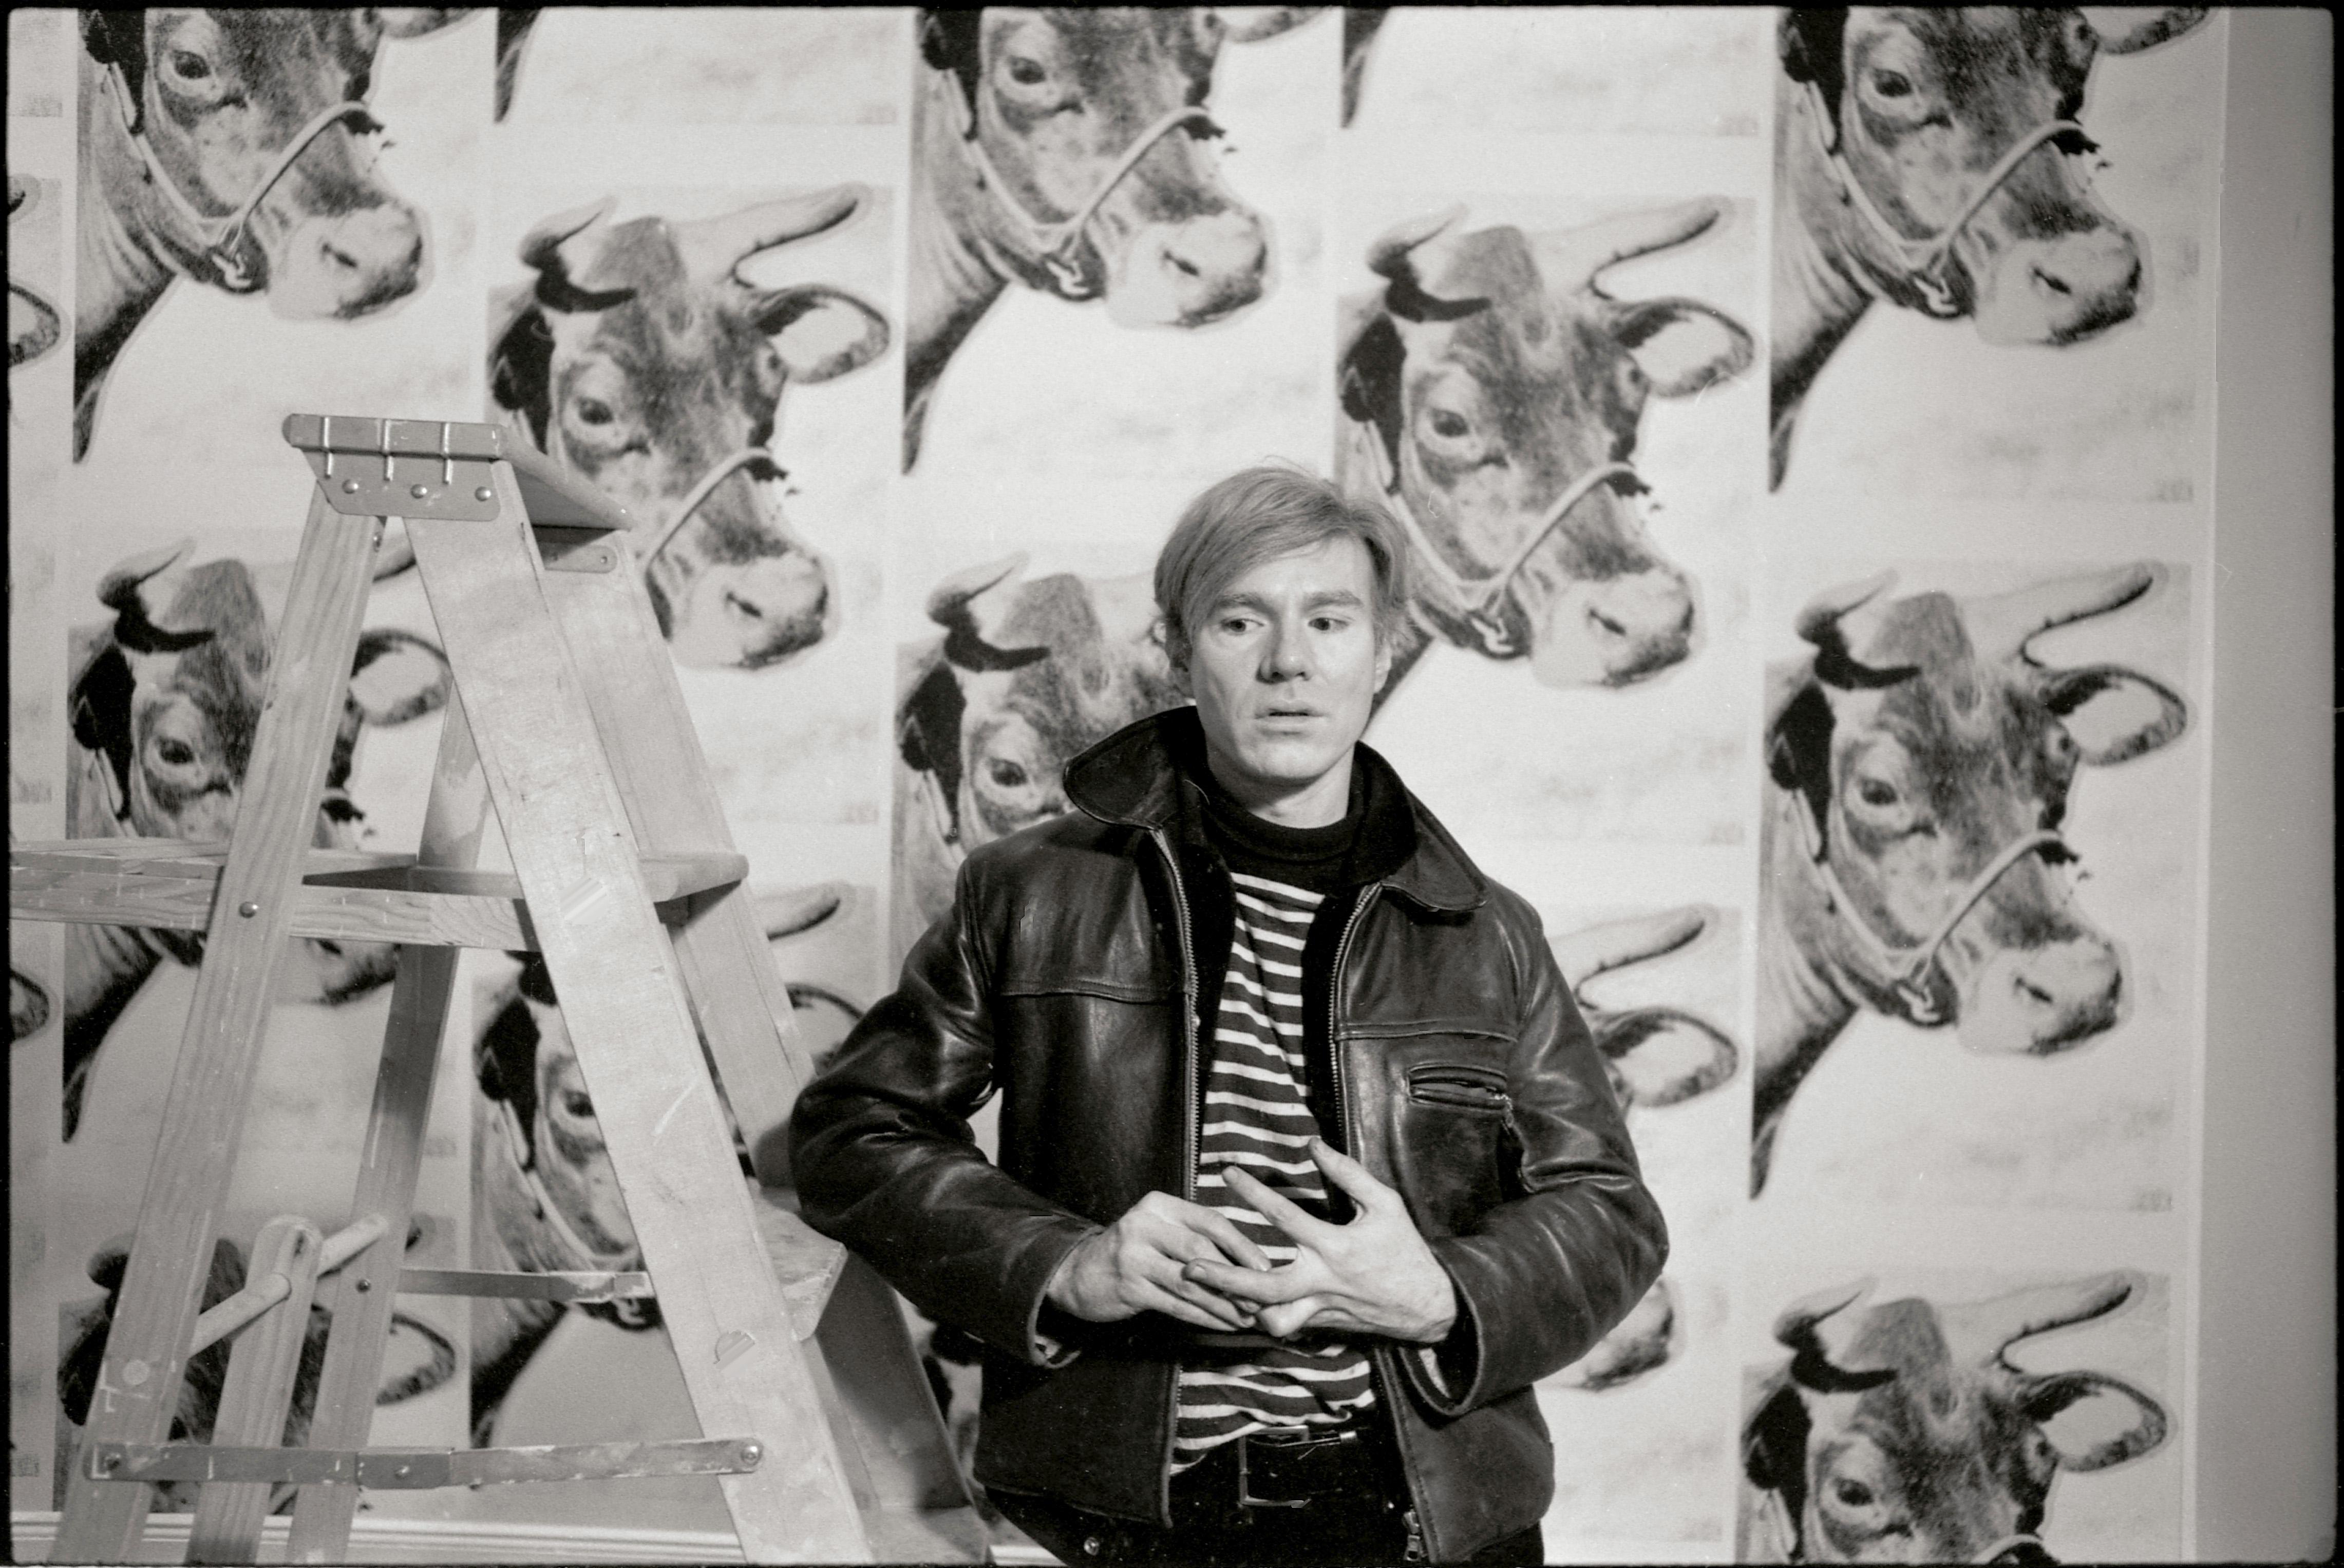 David Gahr Black and White Photograph - Andy Warhol, Black & White Portrait, Photographed in New York, March 1966